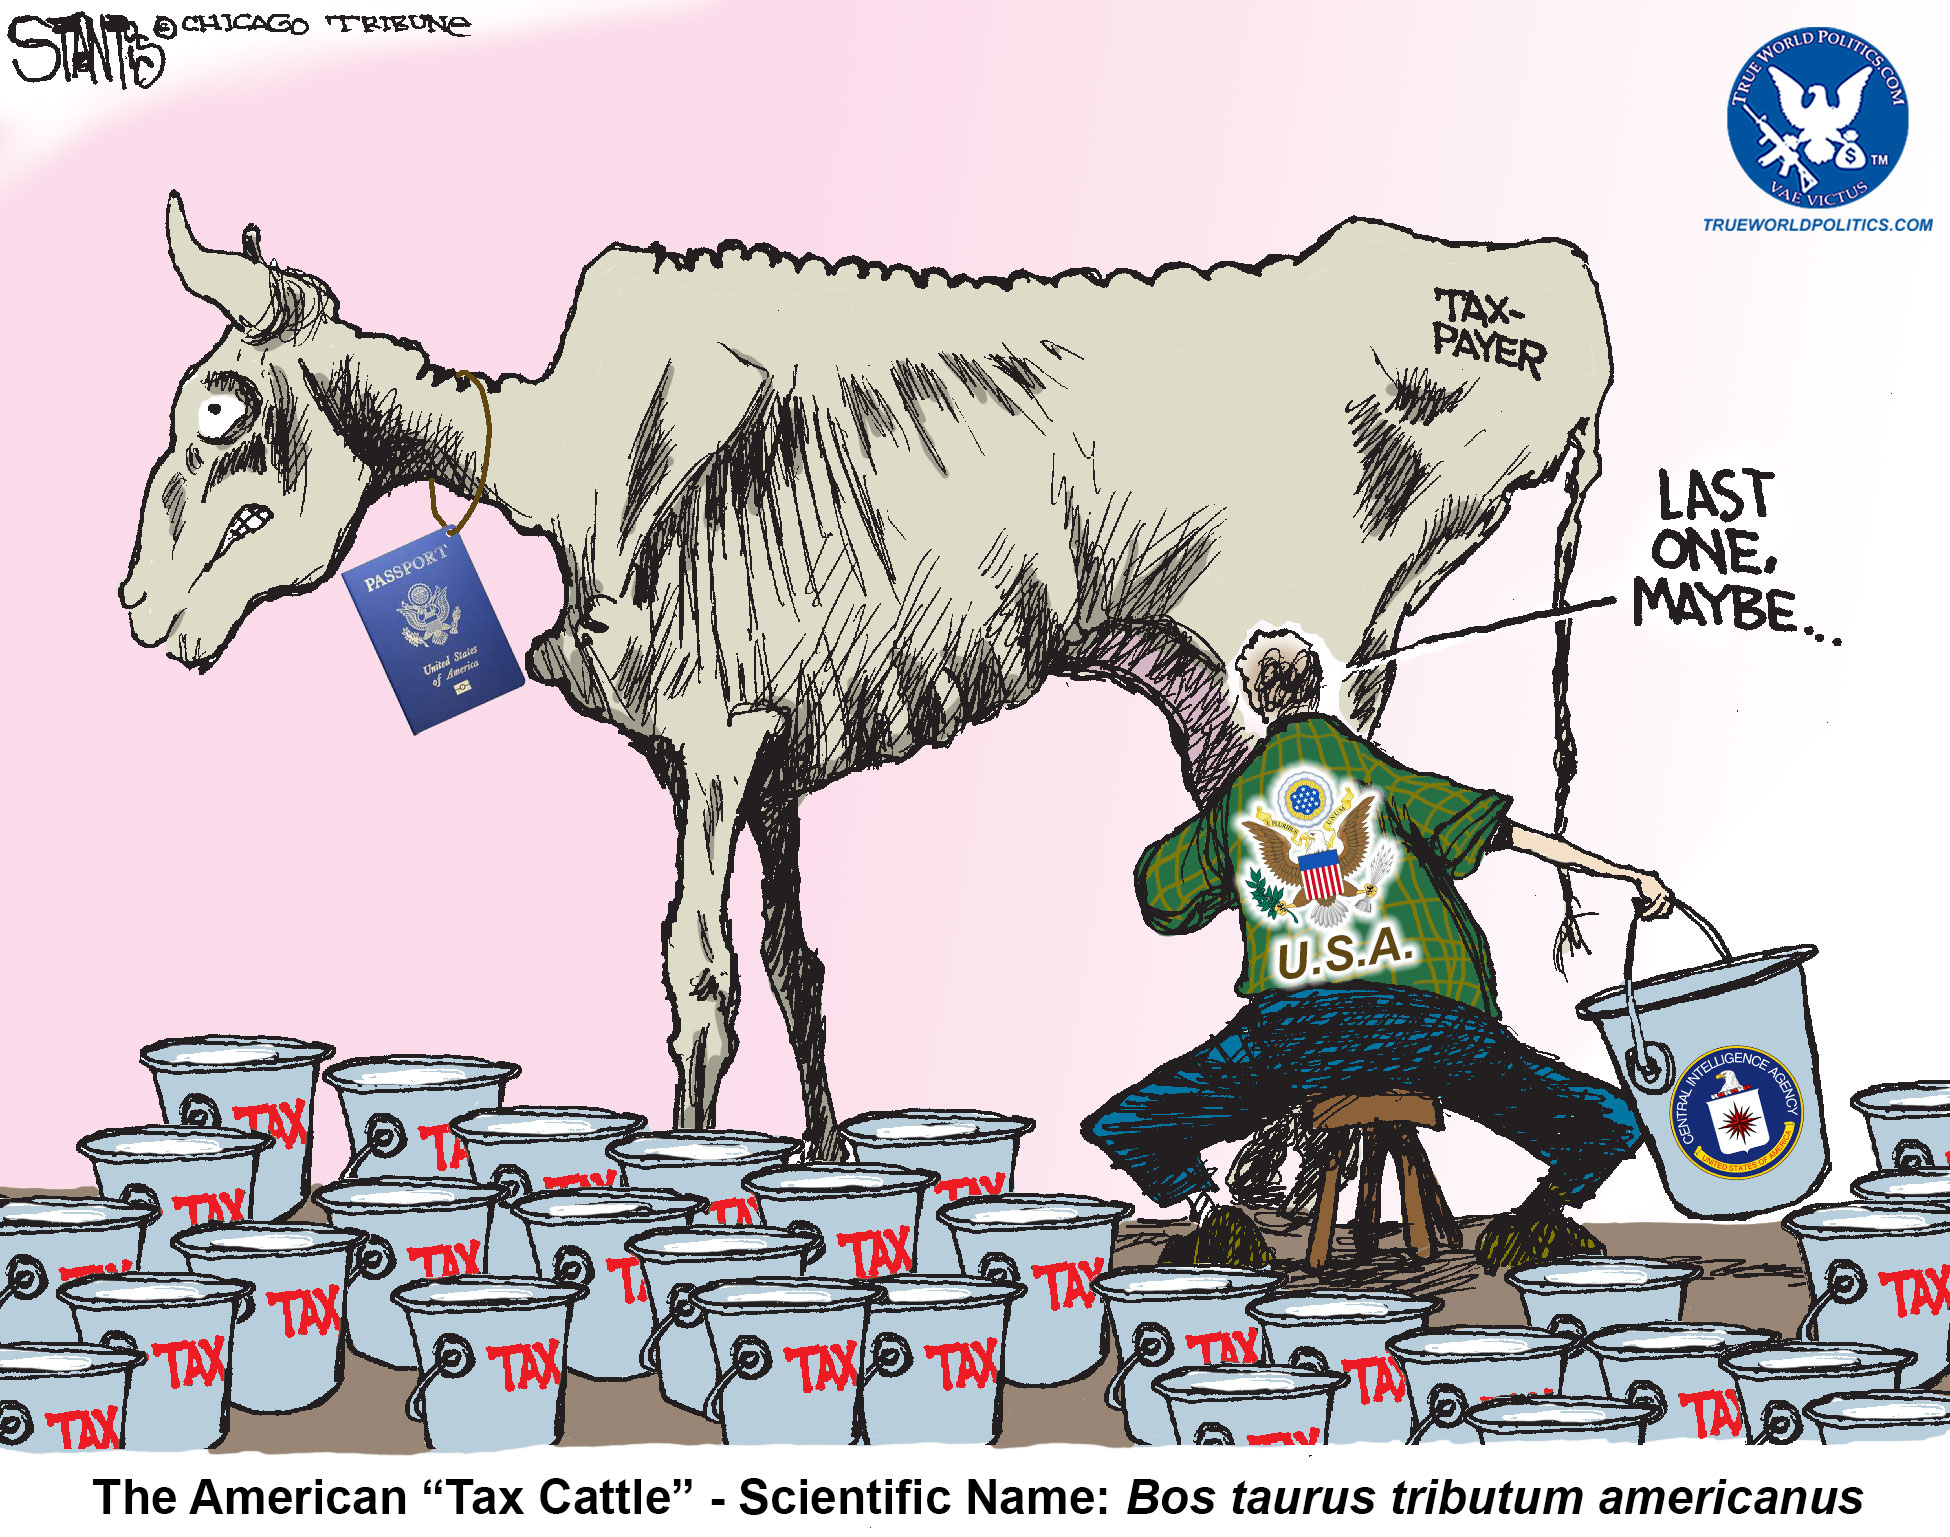 We are all just Tax Cattle - The American Tax Cow